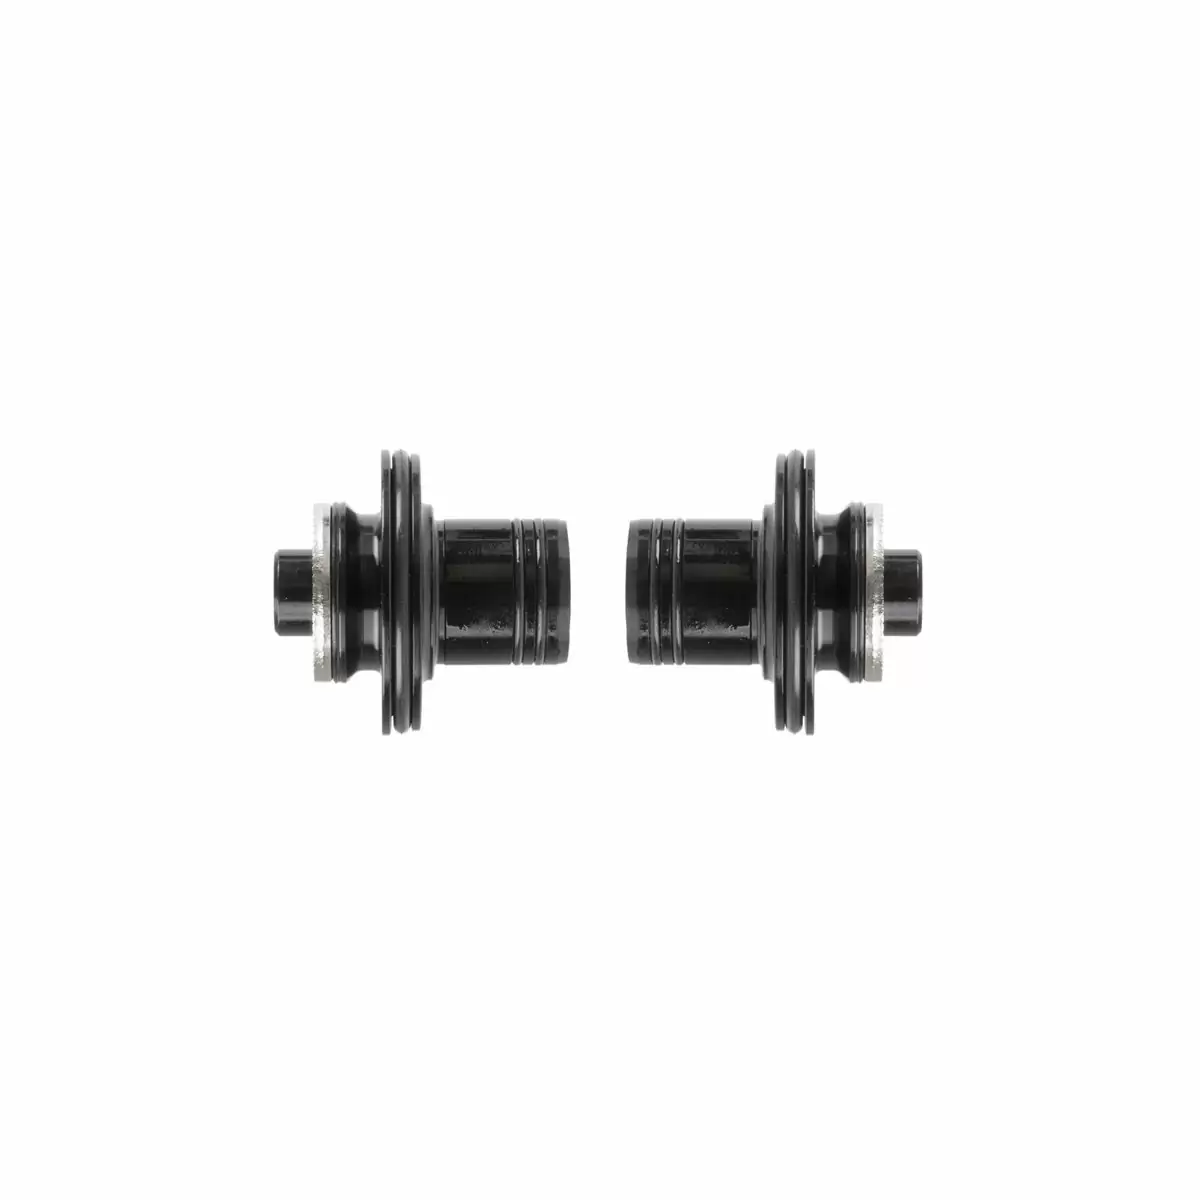 Conversion kit sidecaps for 5mm quick release D771 / XD611 hubs - image